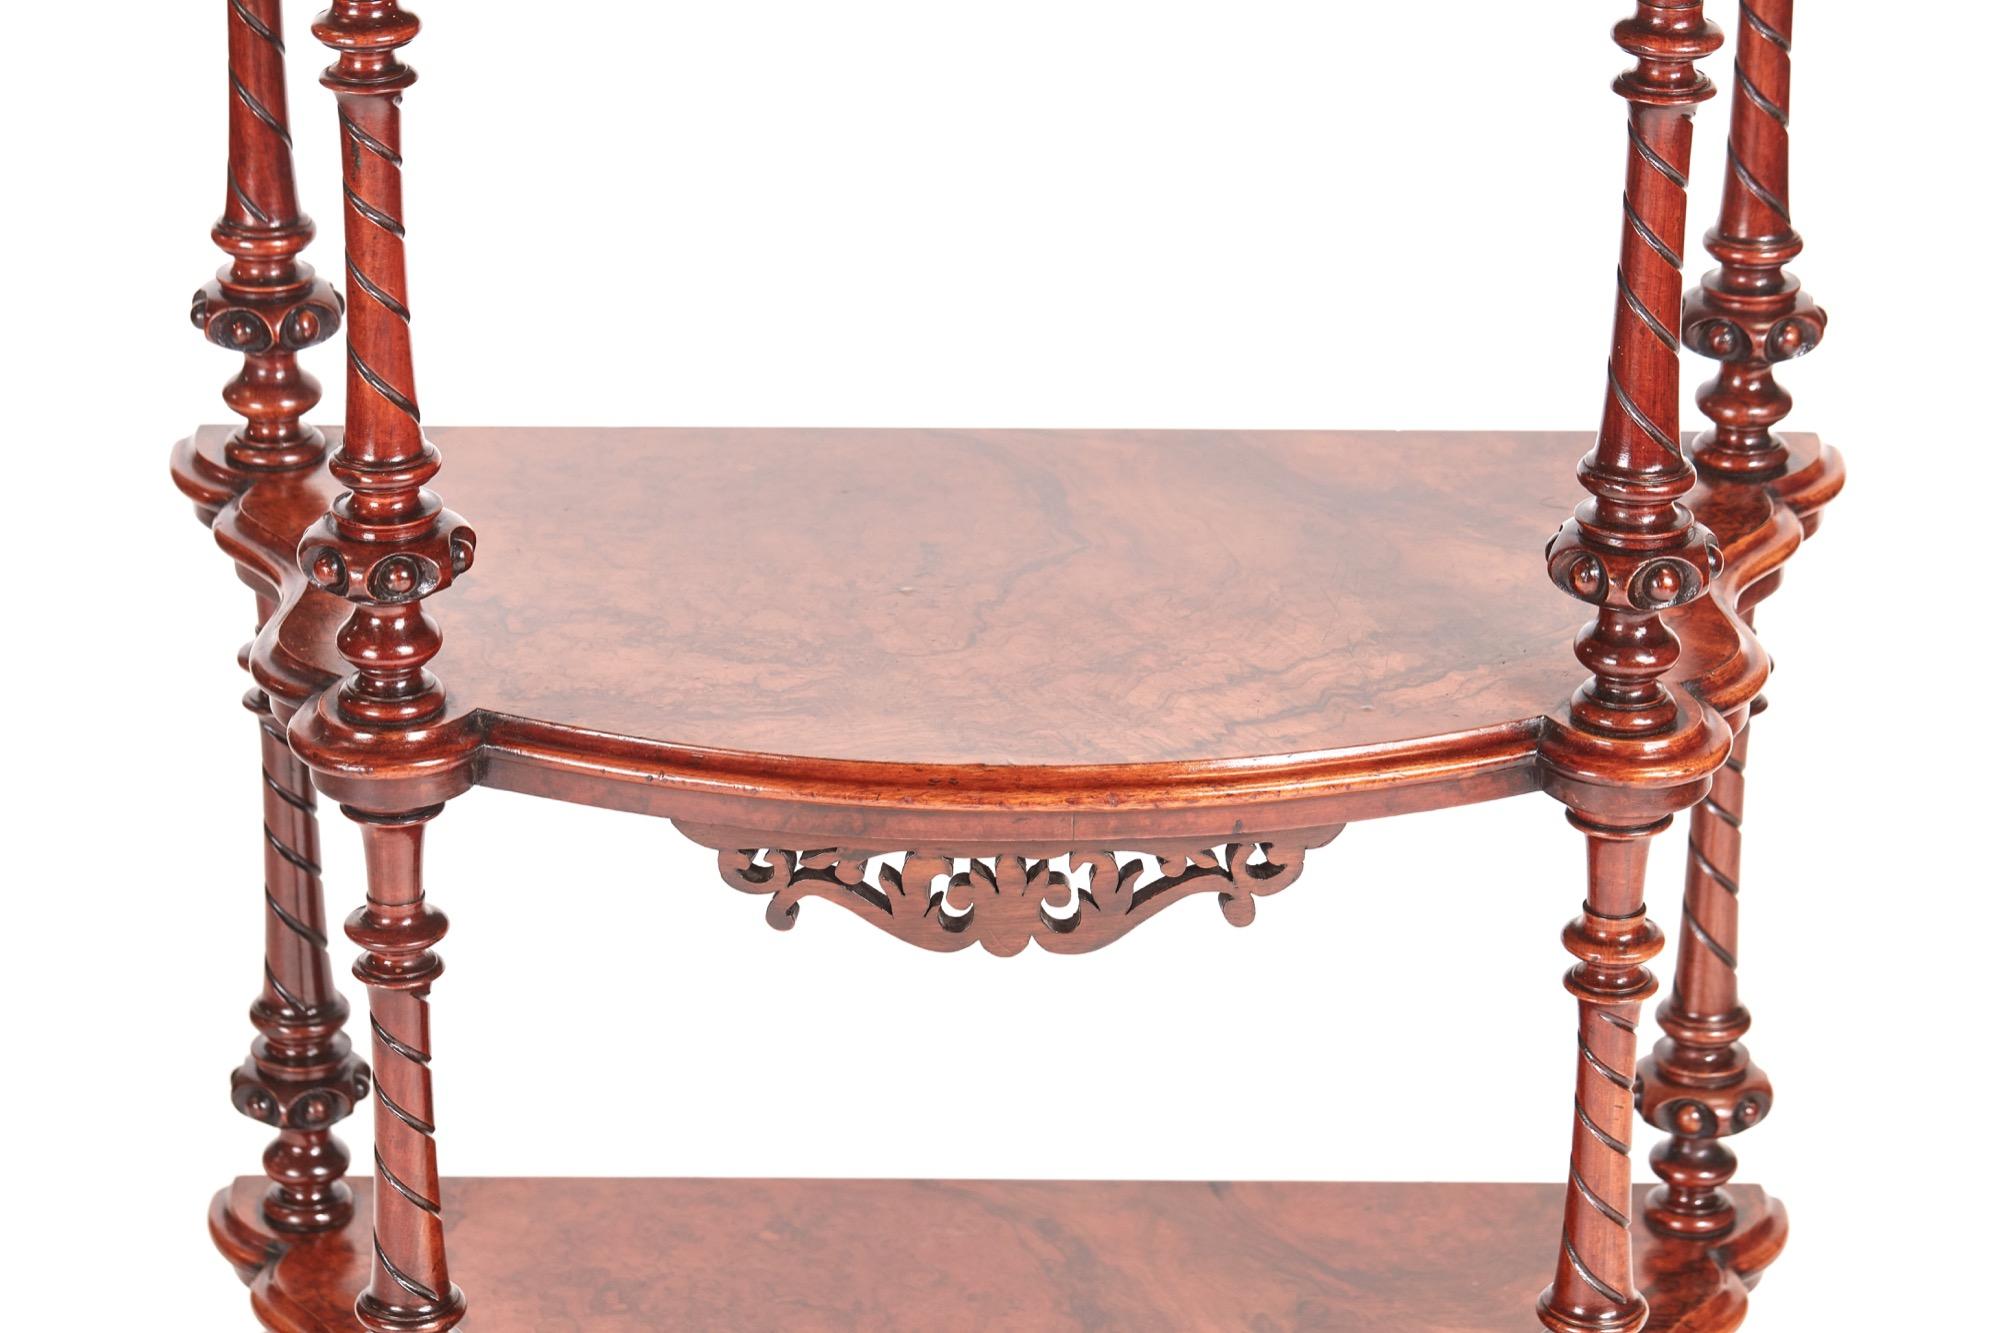 Quality Victorian burr walnut three-tier whatnot having a mirror back supported by attractive pierced solid walnut supports. It boasts a superior burr walnut shaped to and the burr walnut tiers have elegant shaped turned carved reeded supports. It